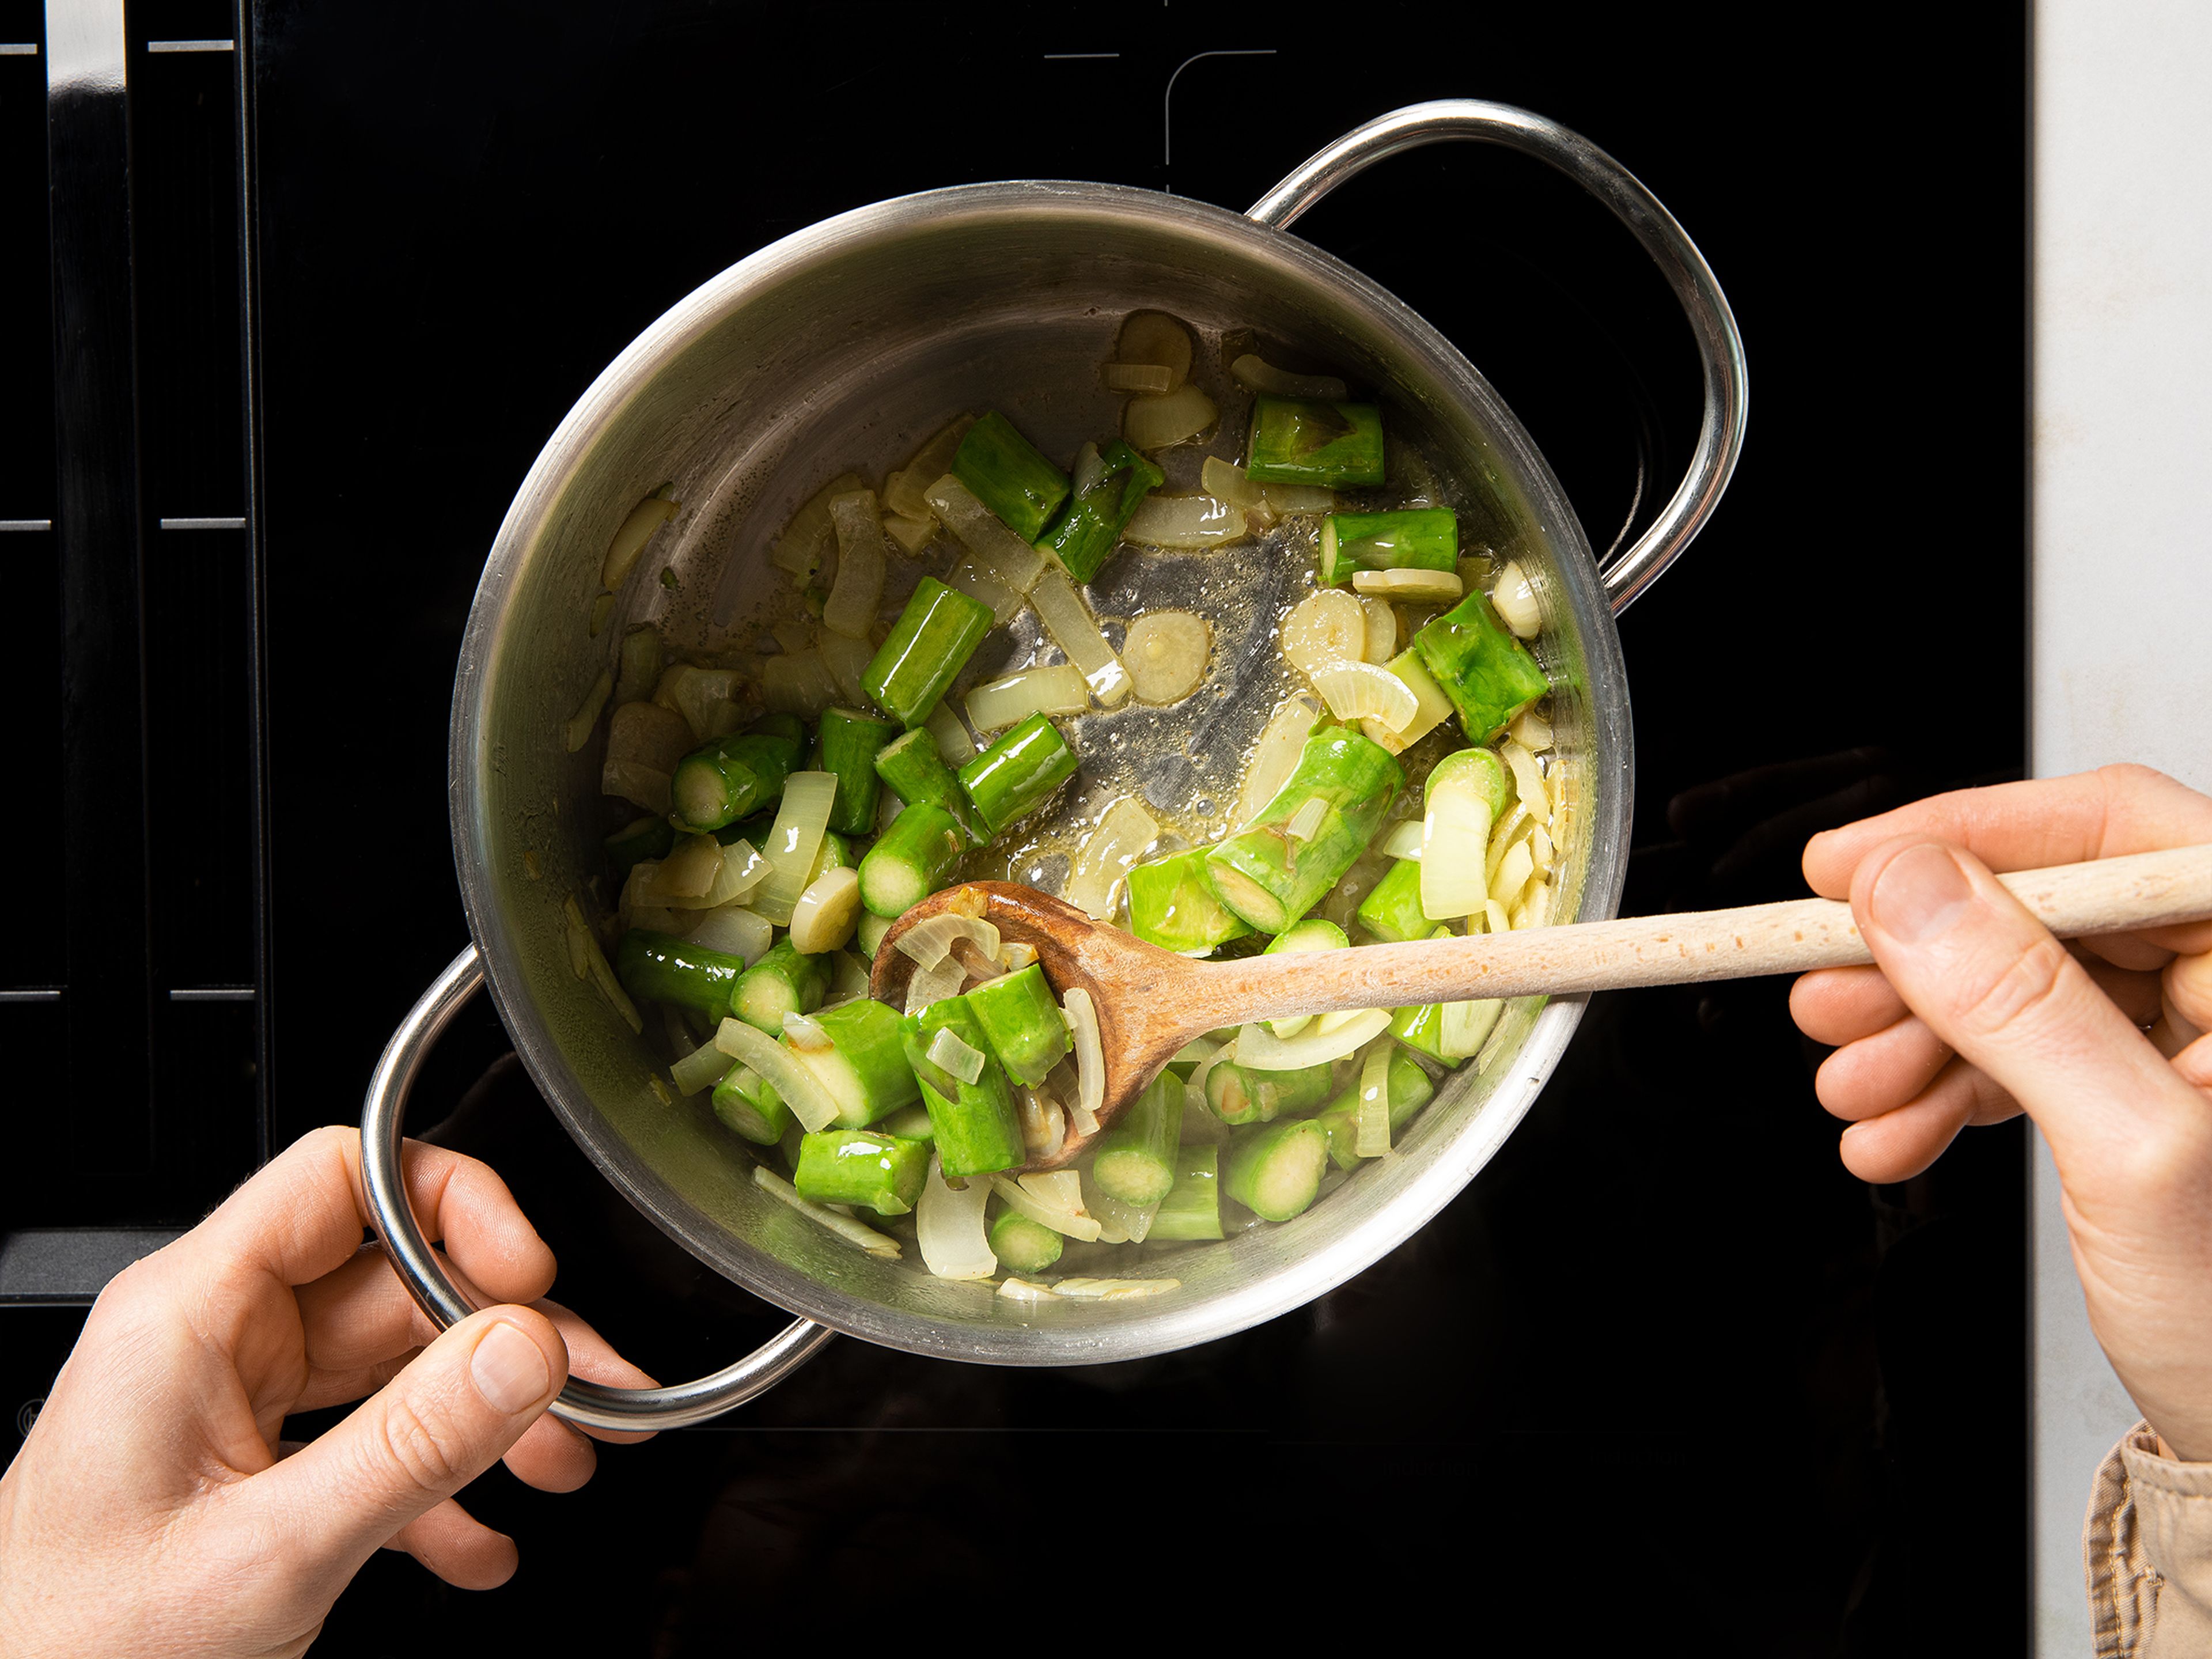 Heat half the butter in a large saucepan over medium heat. Add the garlic and onions and sweat for approx. 8 min. until translucent. Add the chopped asparagus and season with a pinch of salt and some pepper. Continue to simmer for approx. 5 min, stirring occasionally.